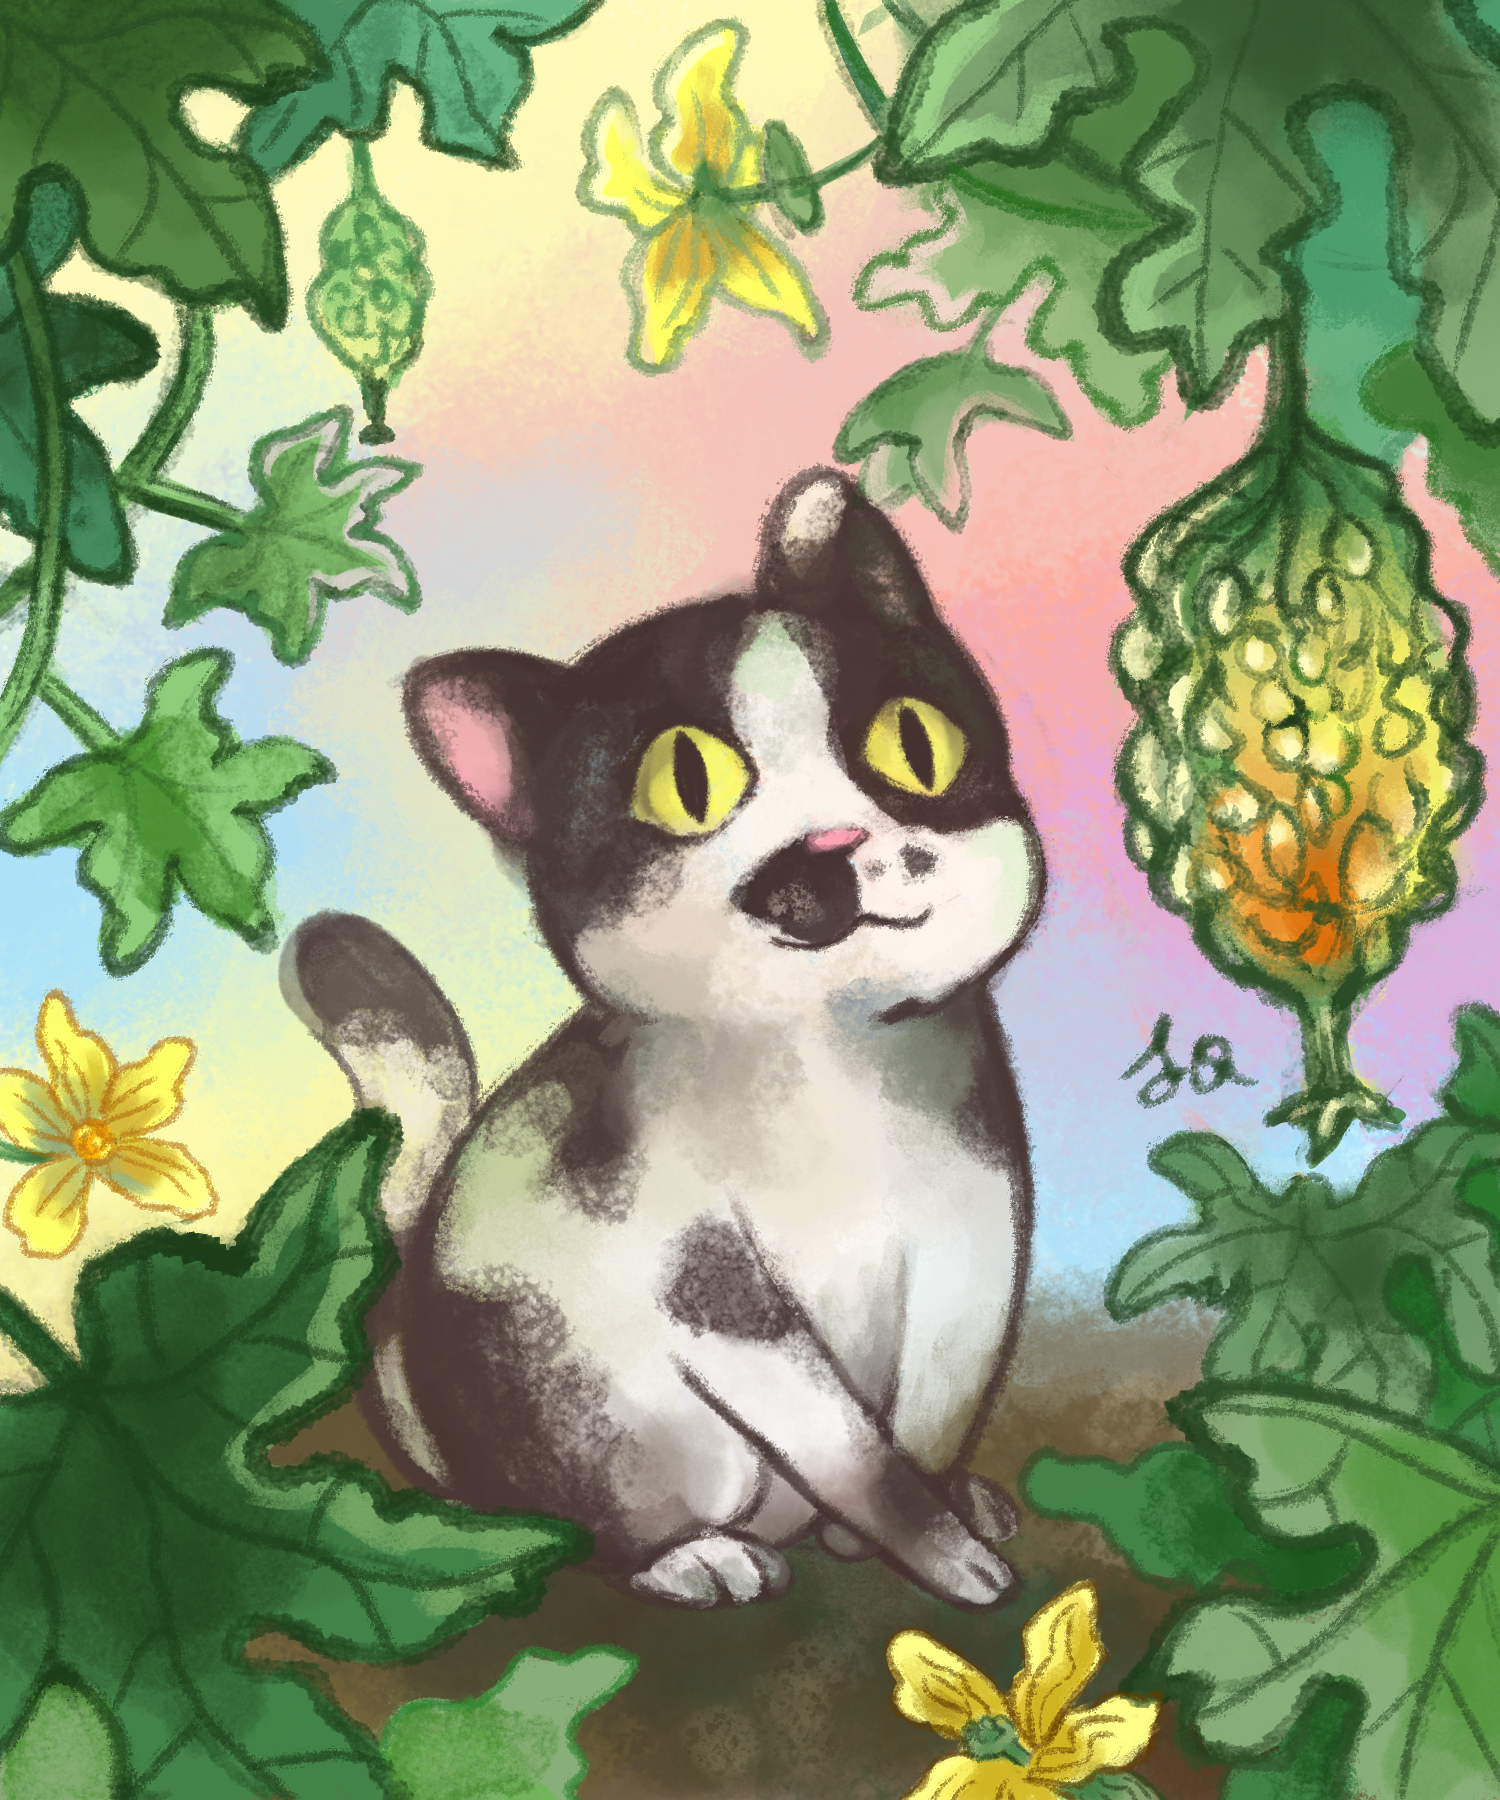 A digital painting of a little black and white cat sitting amongst a patch of flowering bittergourd and admiring a large, ripening gourd, done in a Chinese painting-inspired style